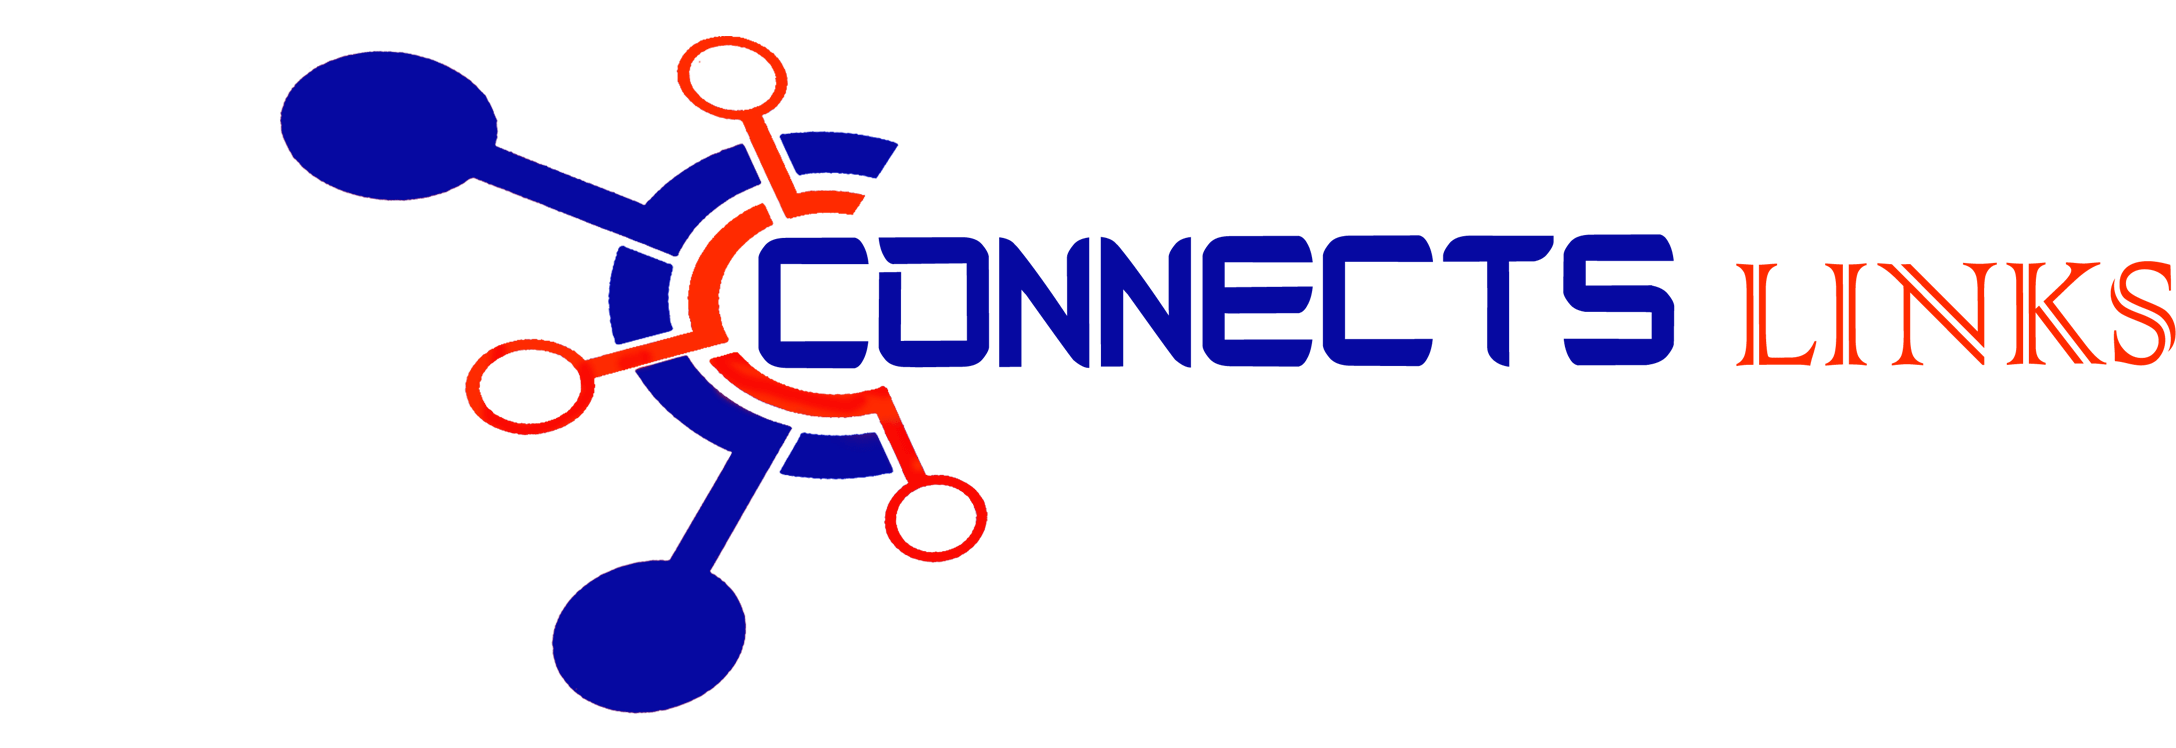 Digital Marketing Connects Links